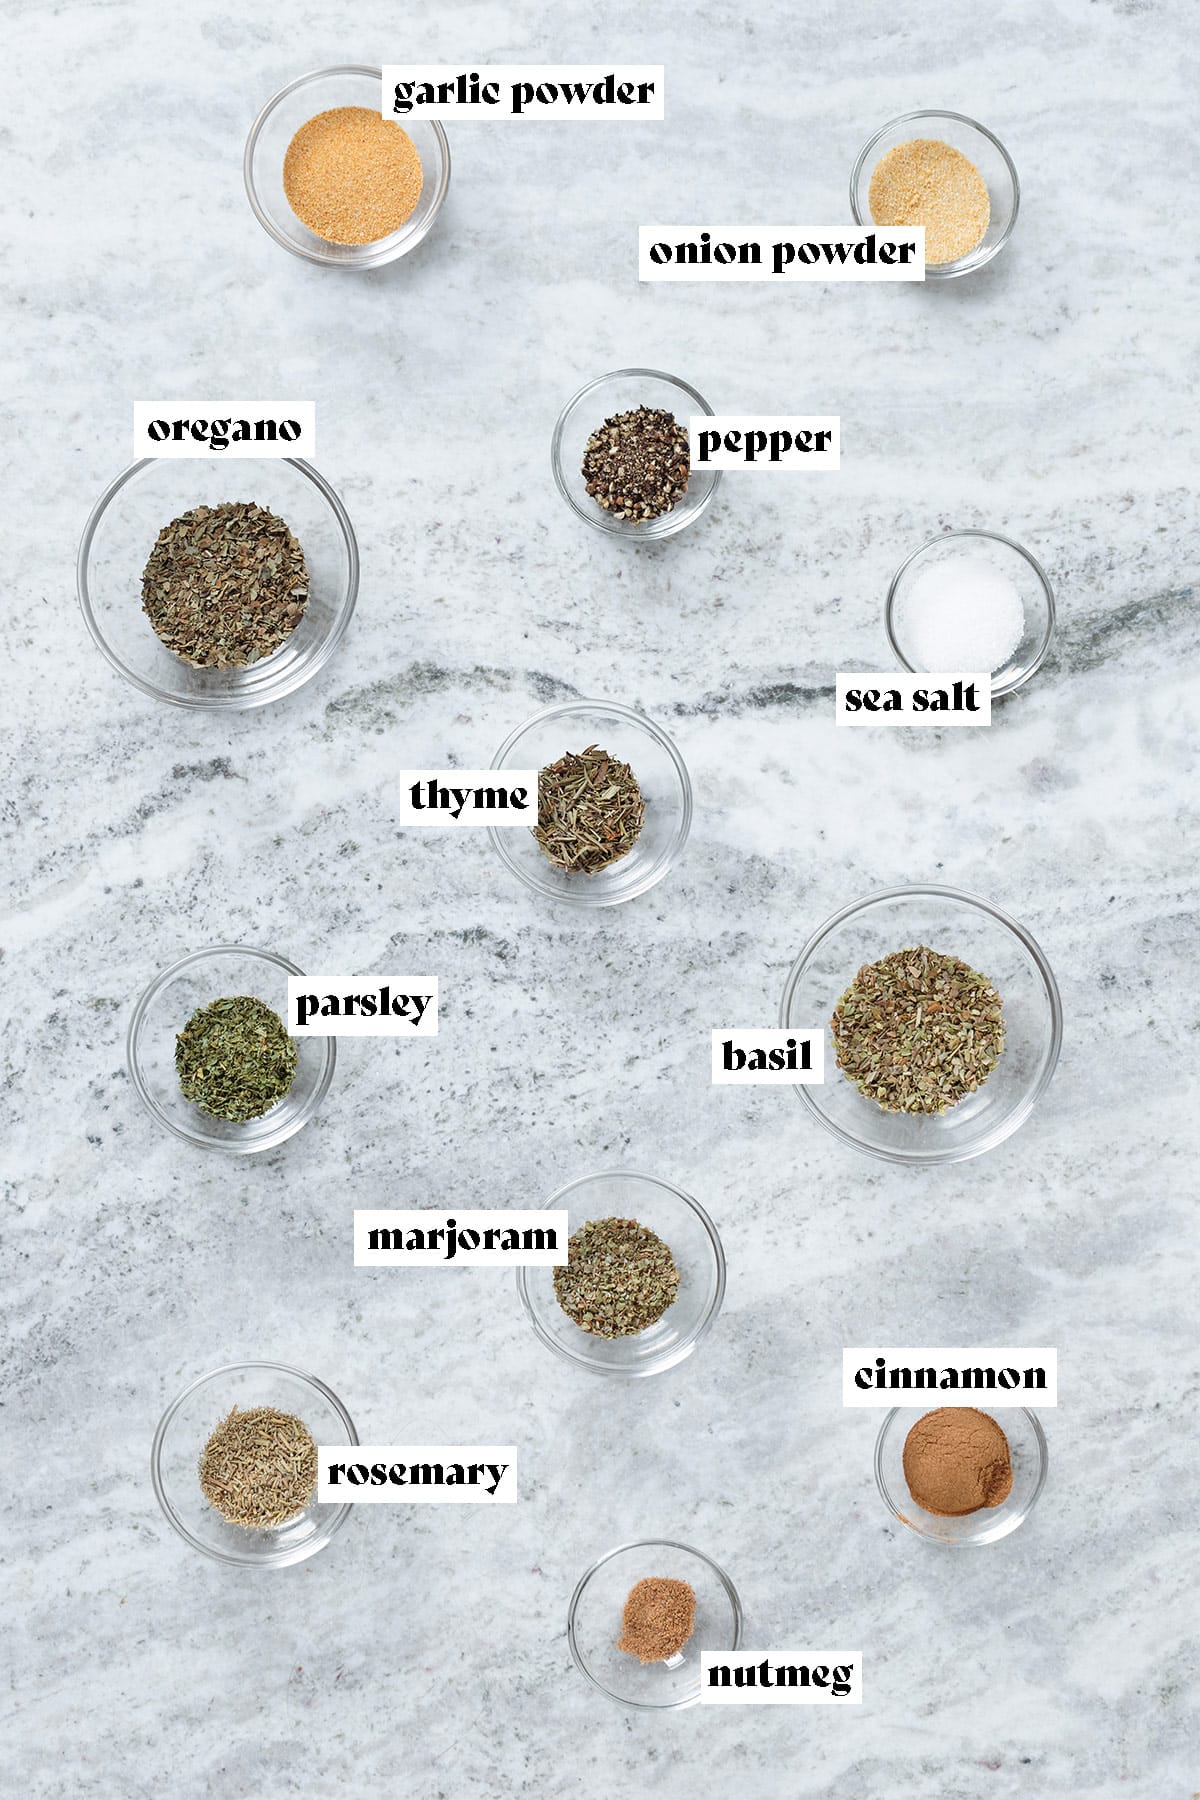 Spices and dried herbs measured out in glass bowl on a grey stone background with text overlay.